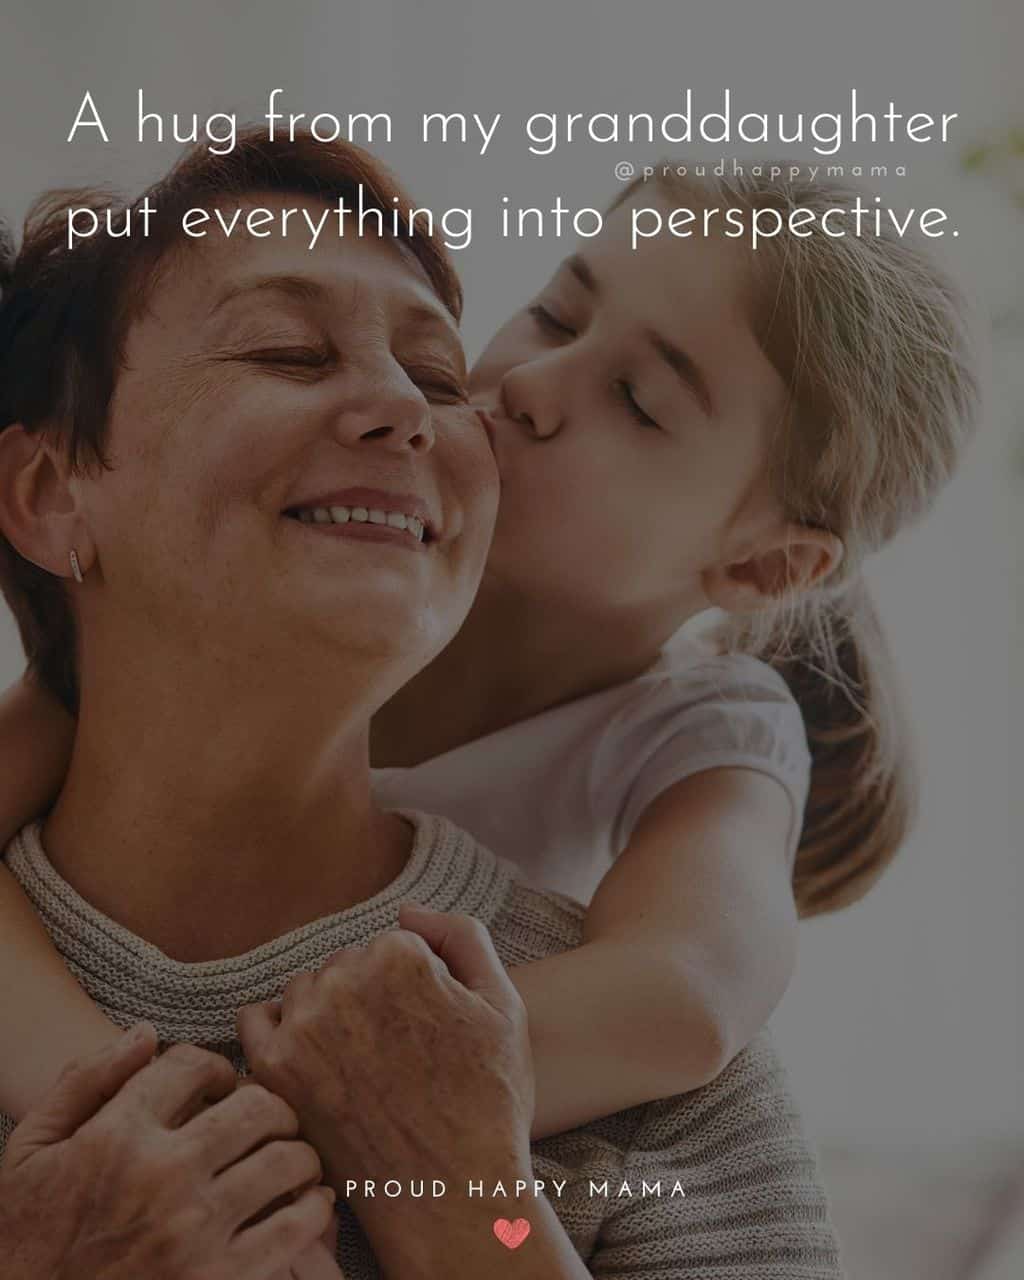 Granddaughter Quotes - A hug from my granddaughter put everything into perspective.’